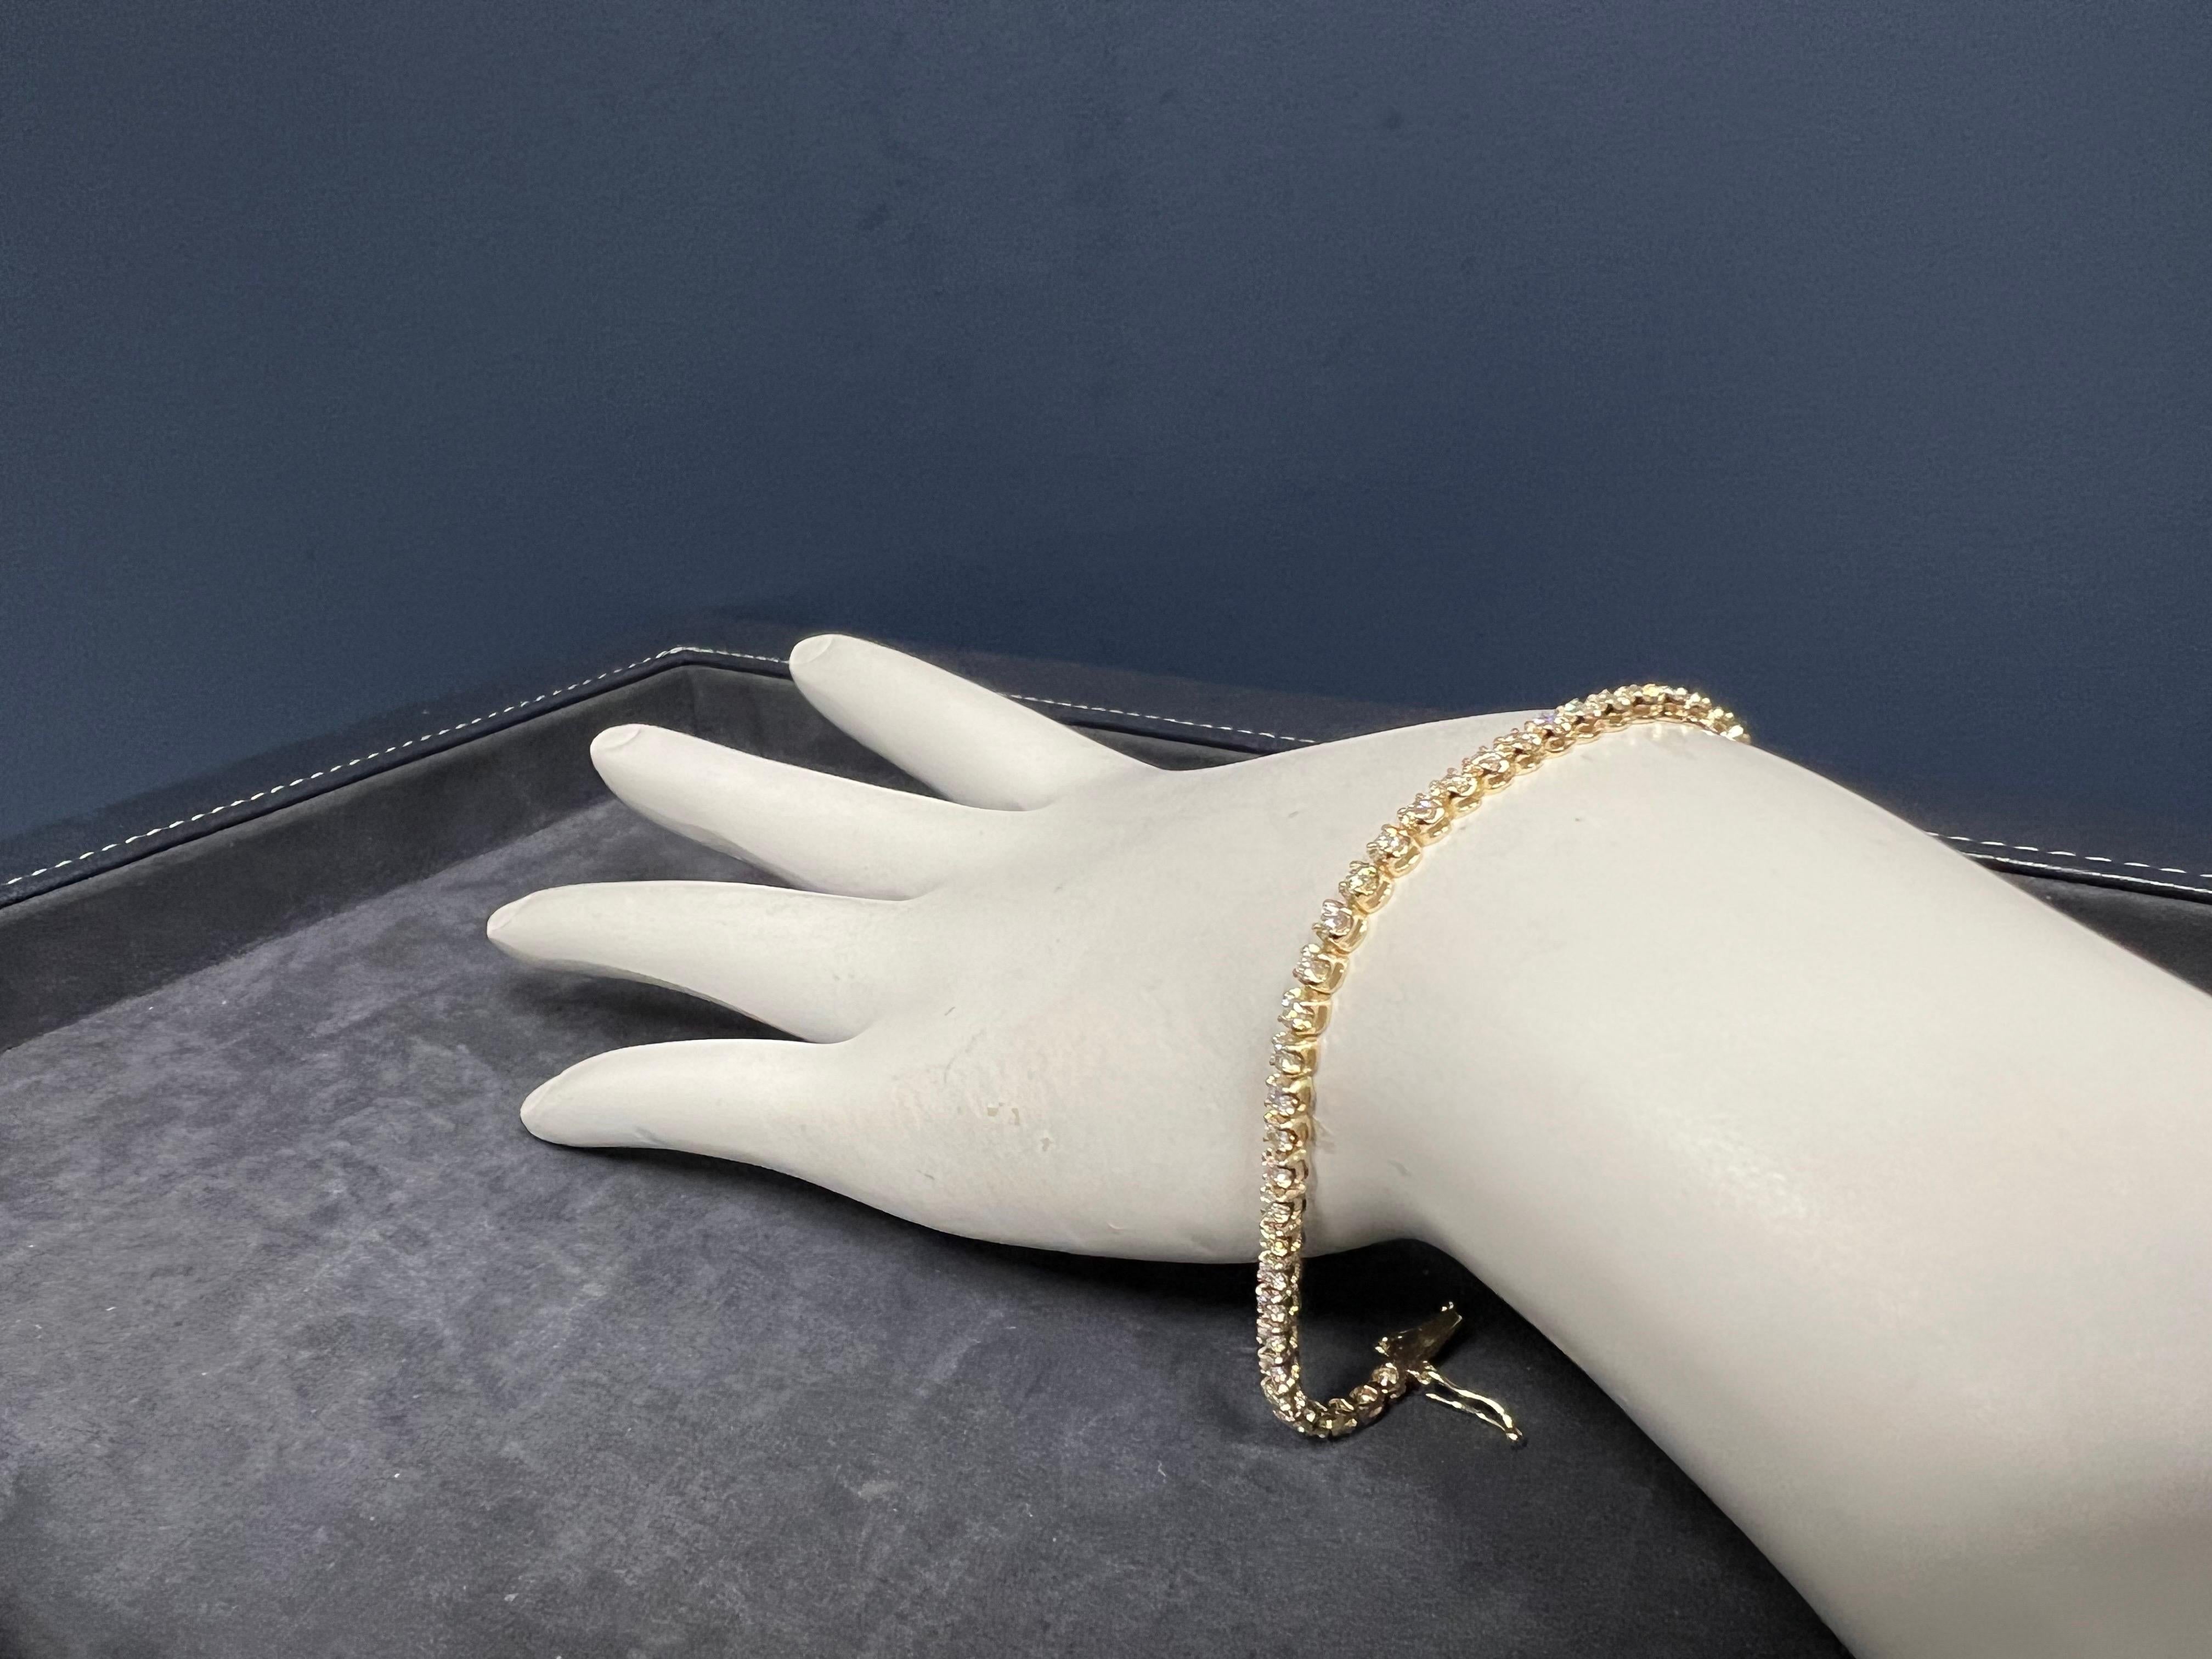 Modern 14k Yellow Gold 2.00 Carat Natural Round Brilliant G-H VS (appx) Diamond Tennis Bracelet.

The piece is set with 58 natural round brilliant diamonds. 

The bracelet weighs 6.1 grams and is 7